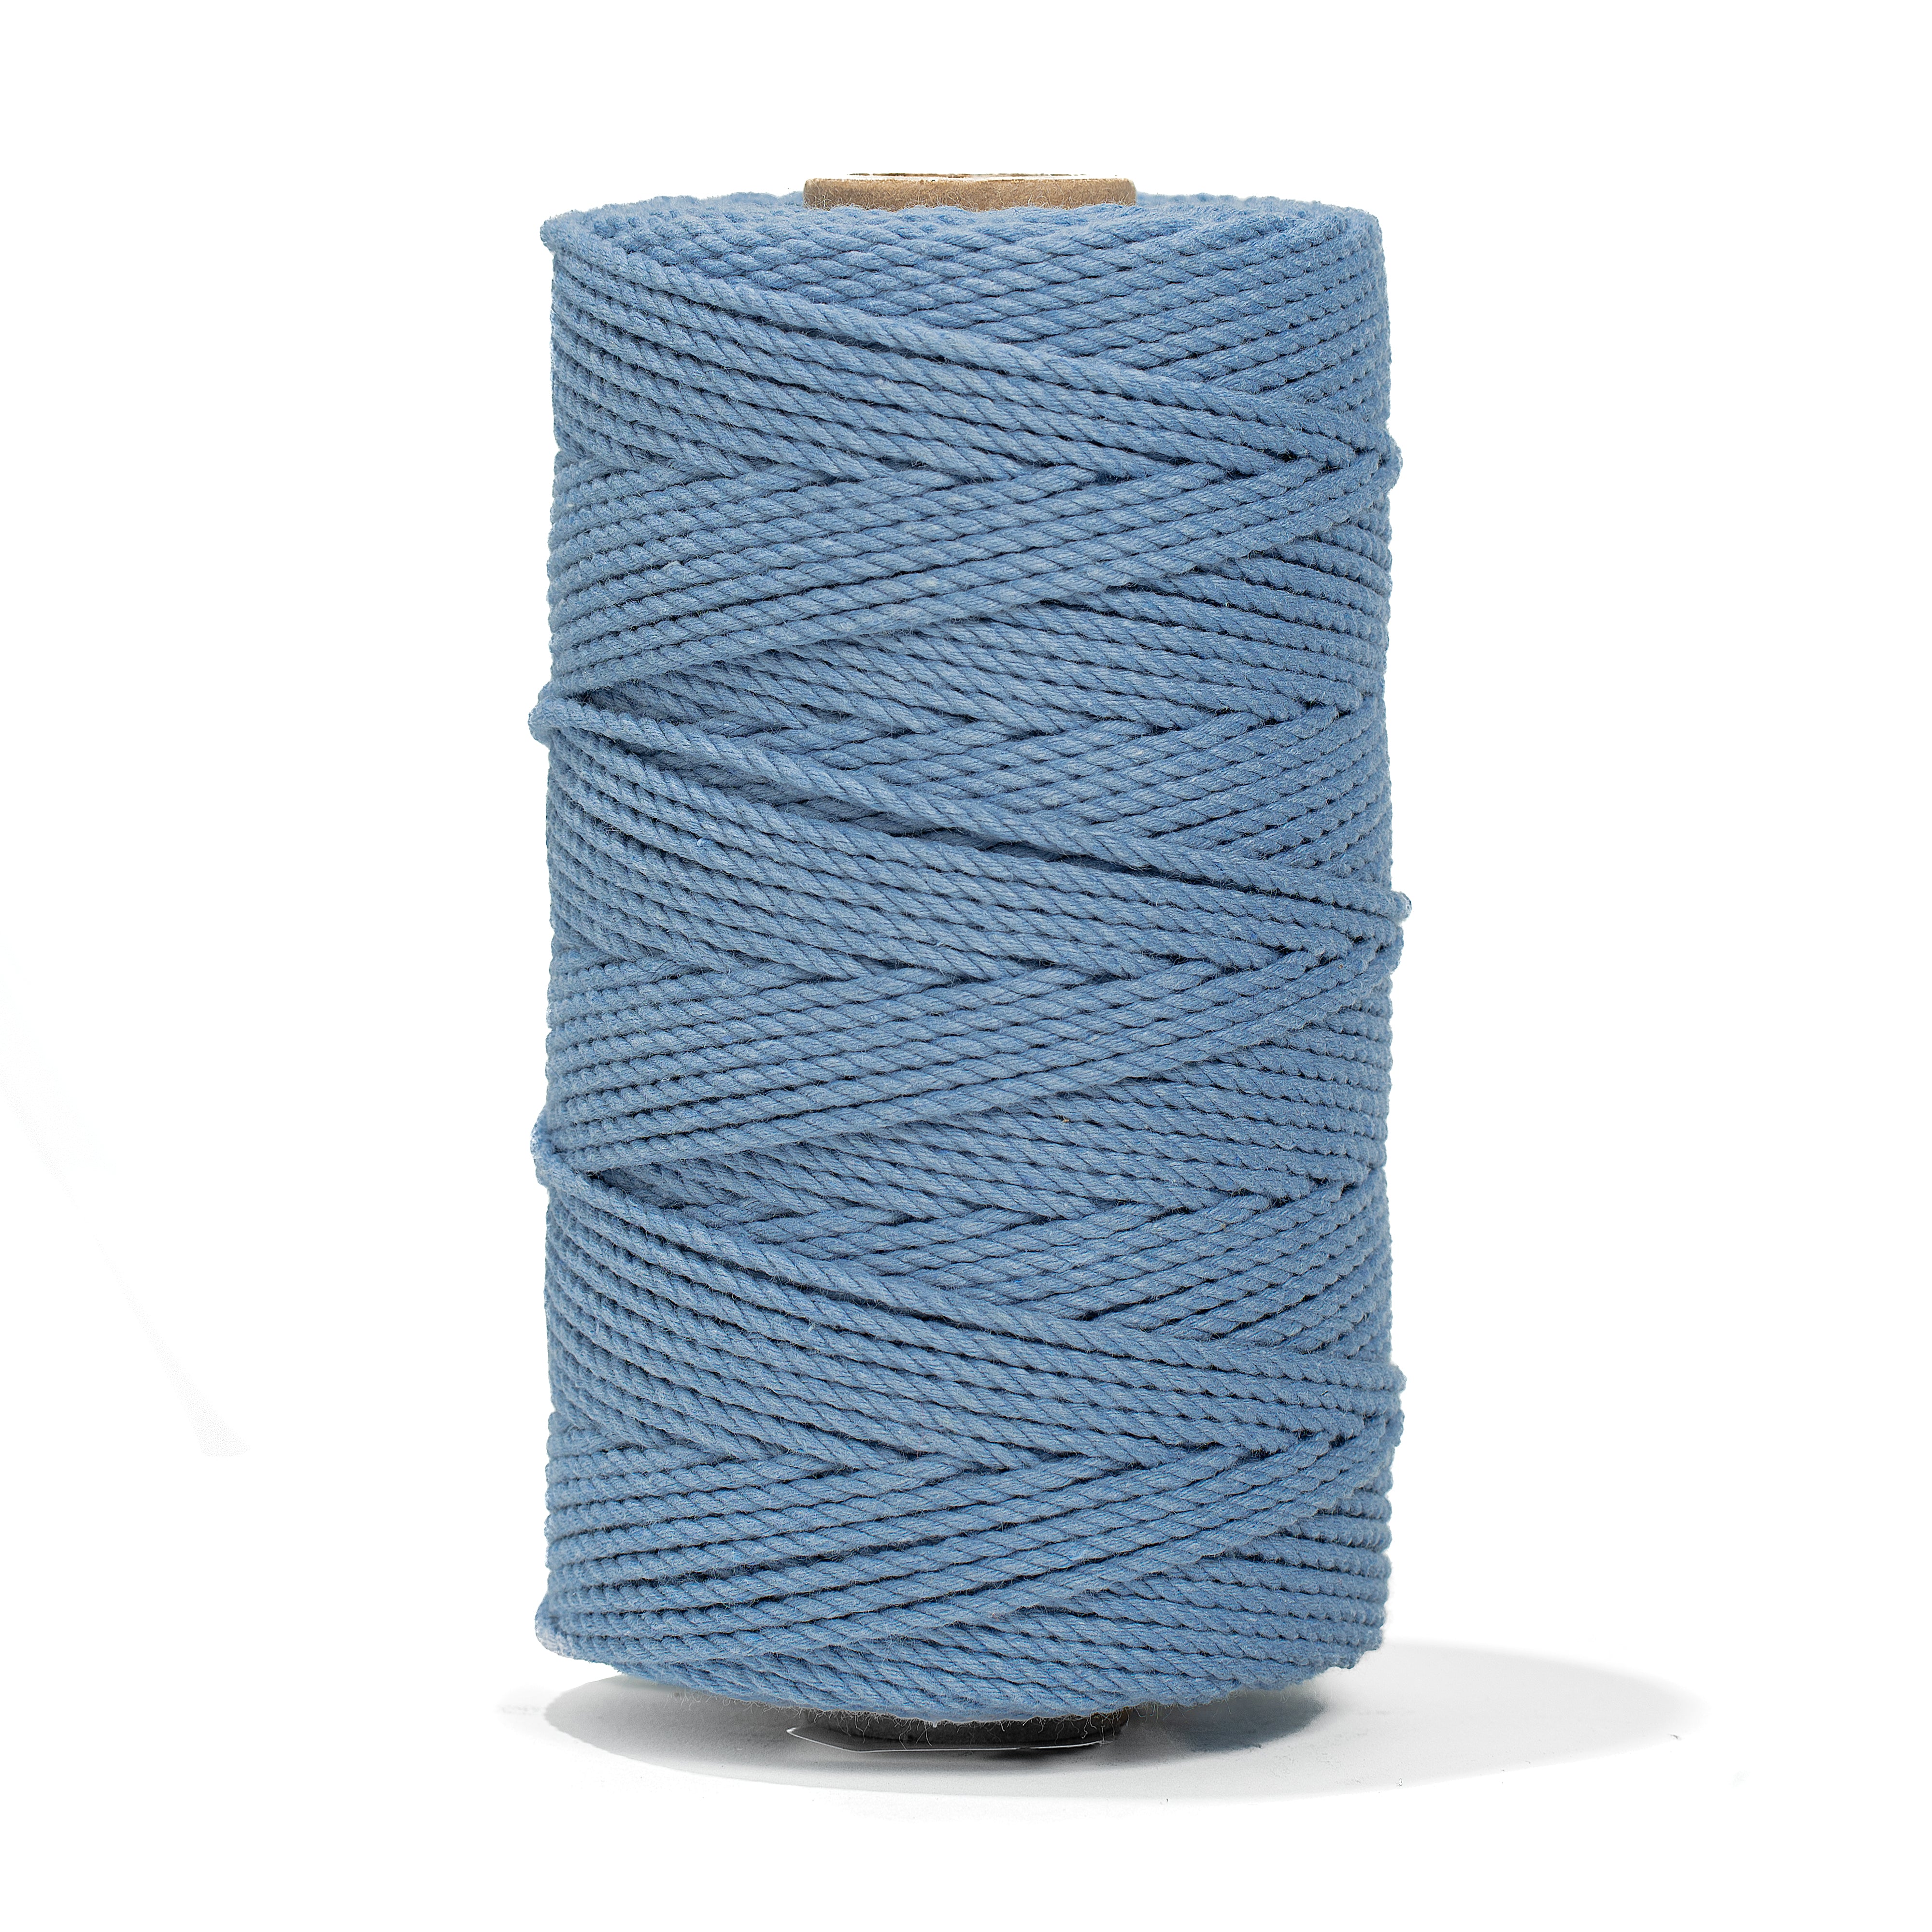 Recycled Cotton Ropes For Macrame & Weaving - 2mm 3 ply